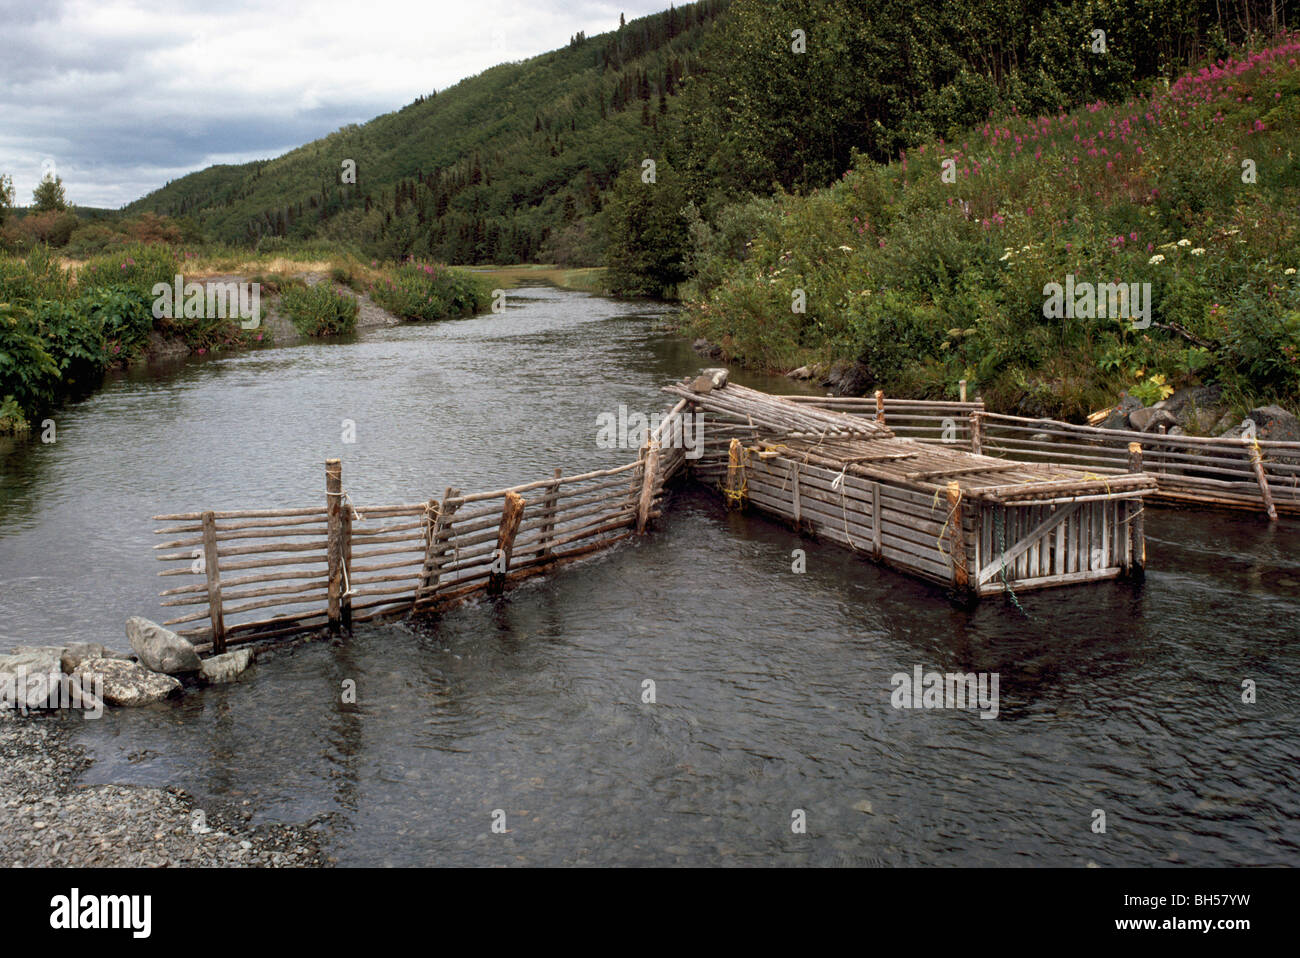 Traditional Native American Indian Salmon Fish Trap Weir on River